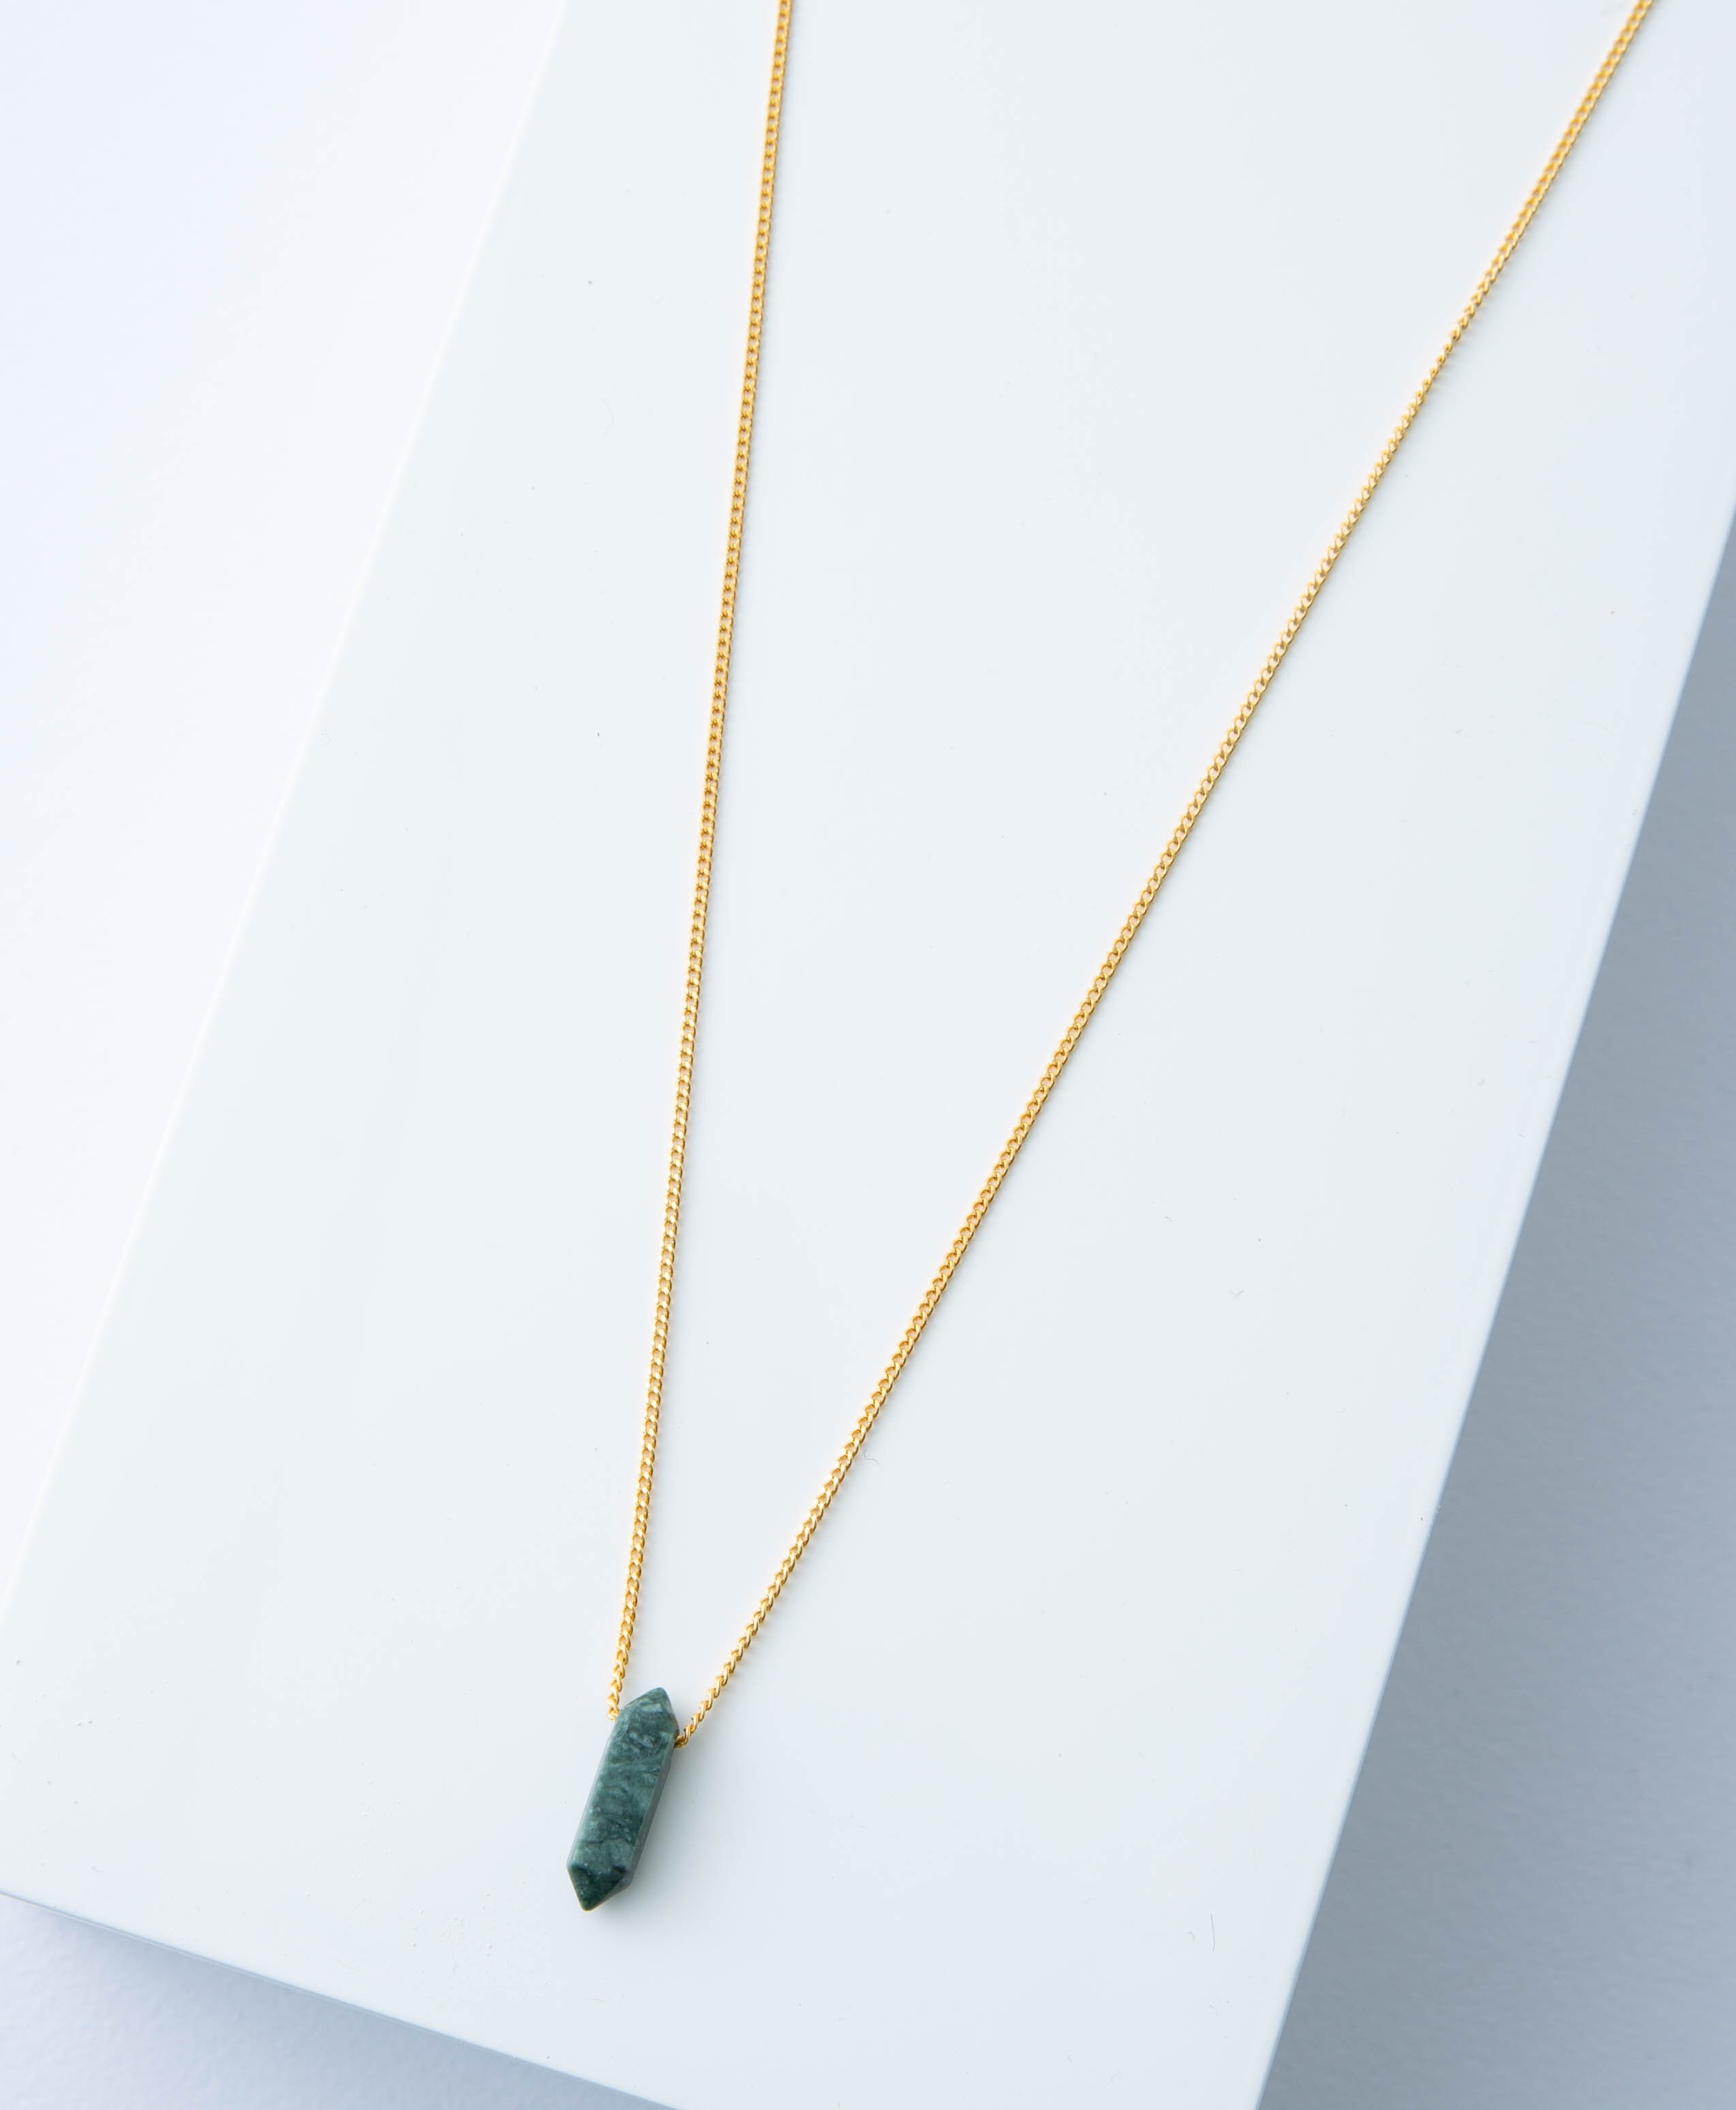 https://www.noondaycollection.info/img/product/petite-prism-necklace/petite-prism-necklace-large.jpg